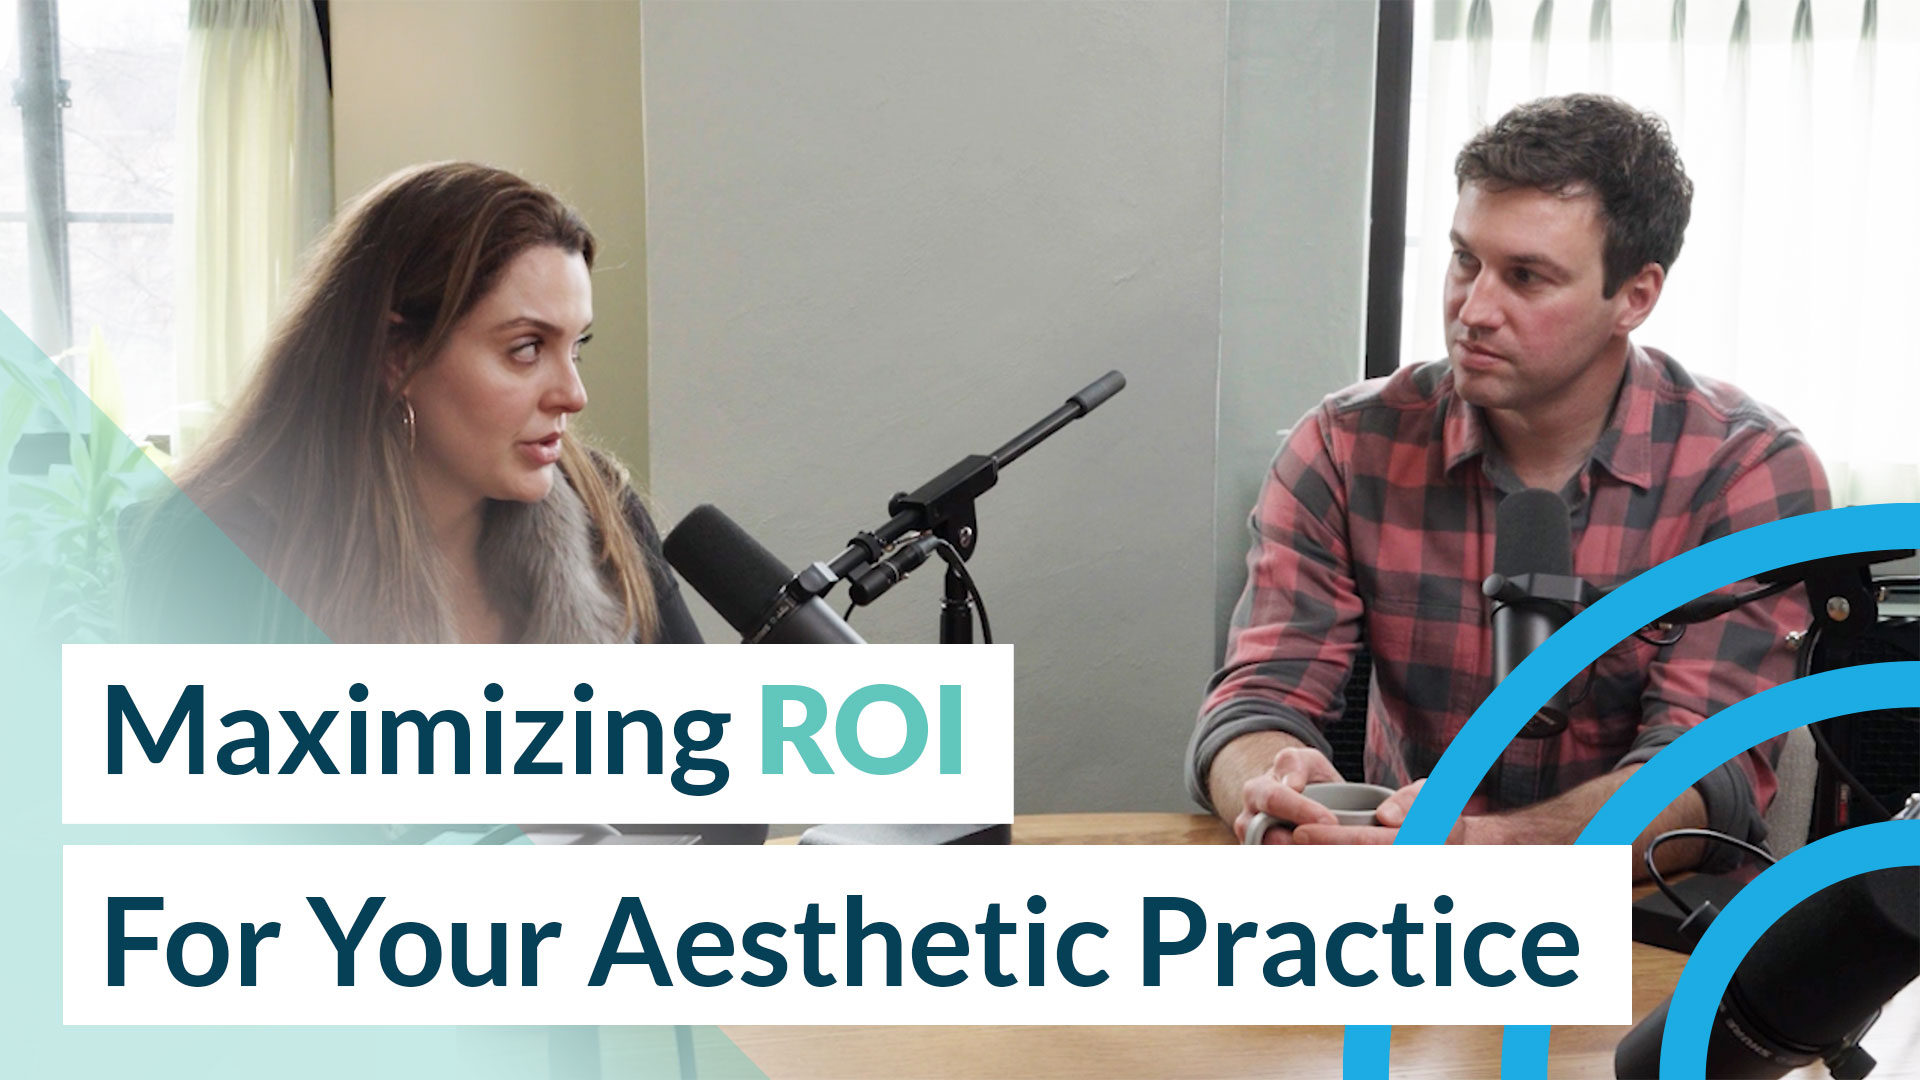 Maximize ROI for your Aesthetic Practice